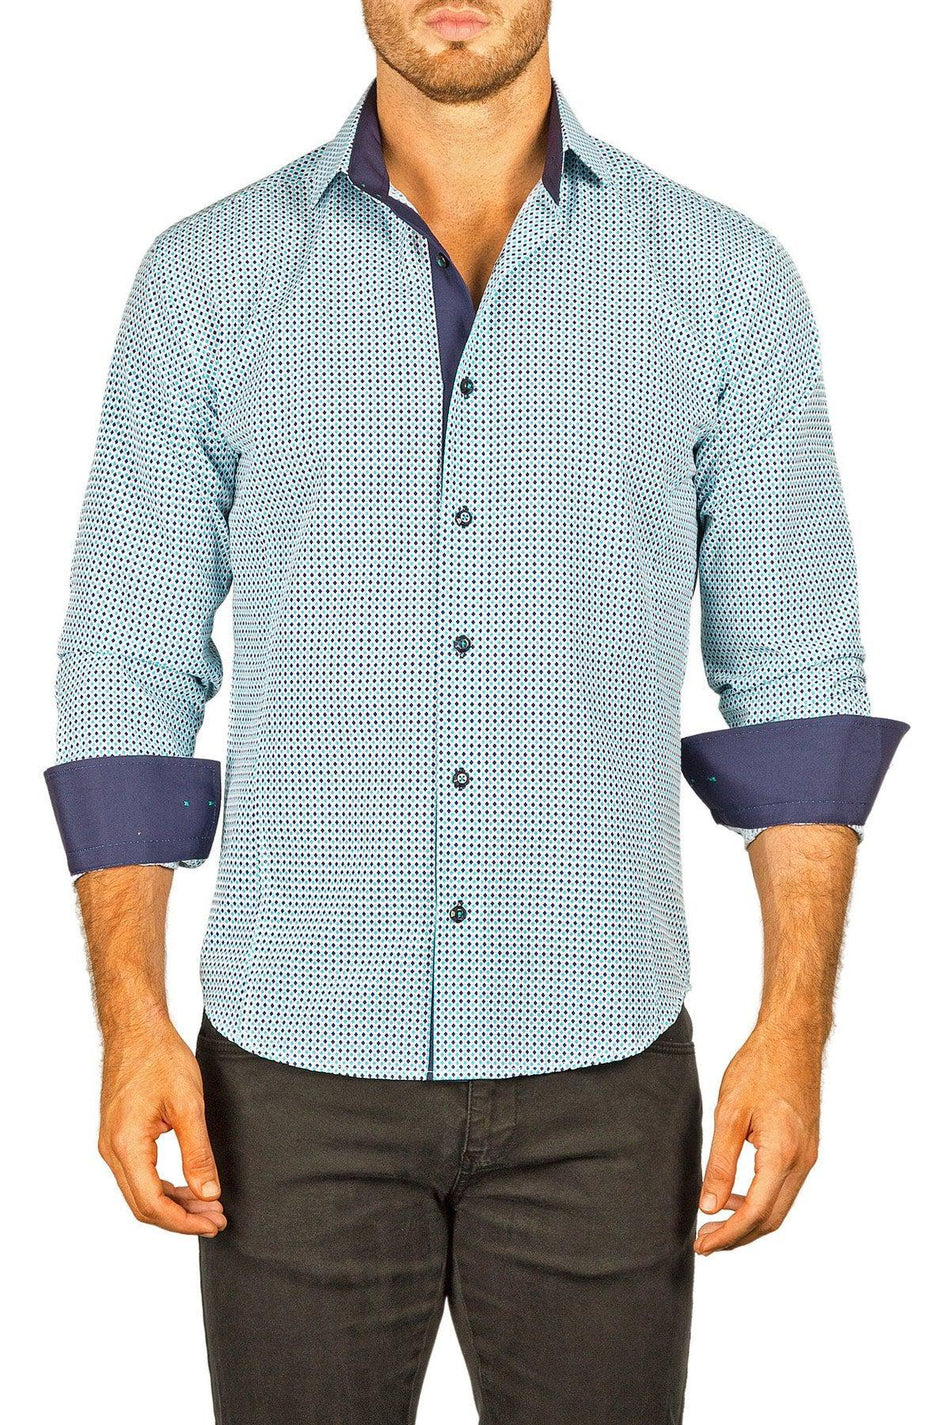 Men's Modern Fit Cotton Button Up Turquoise with Dots